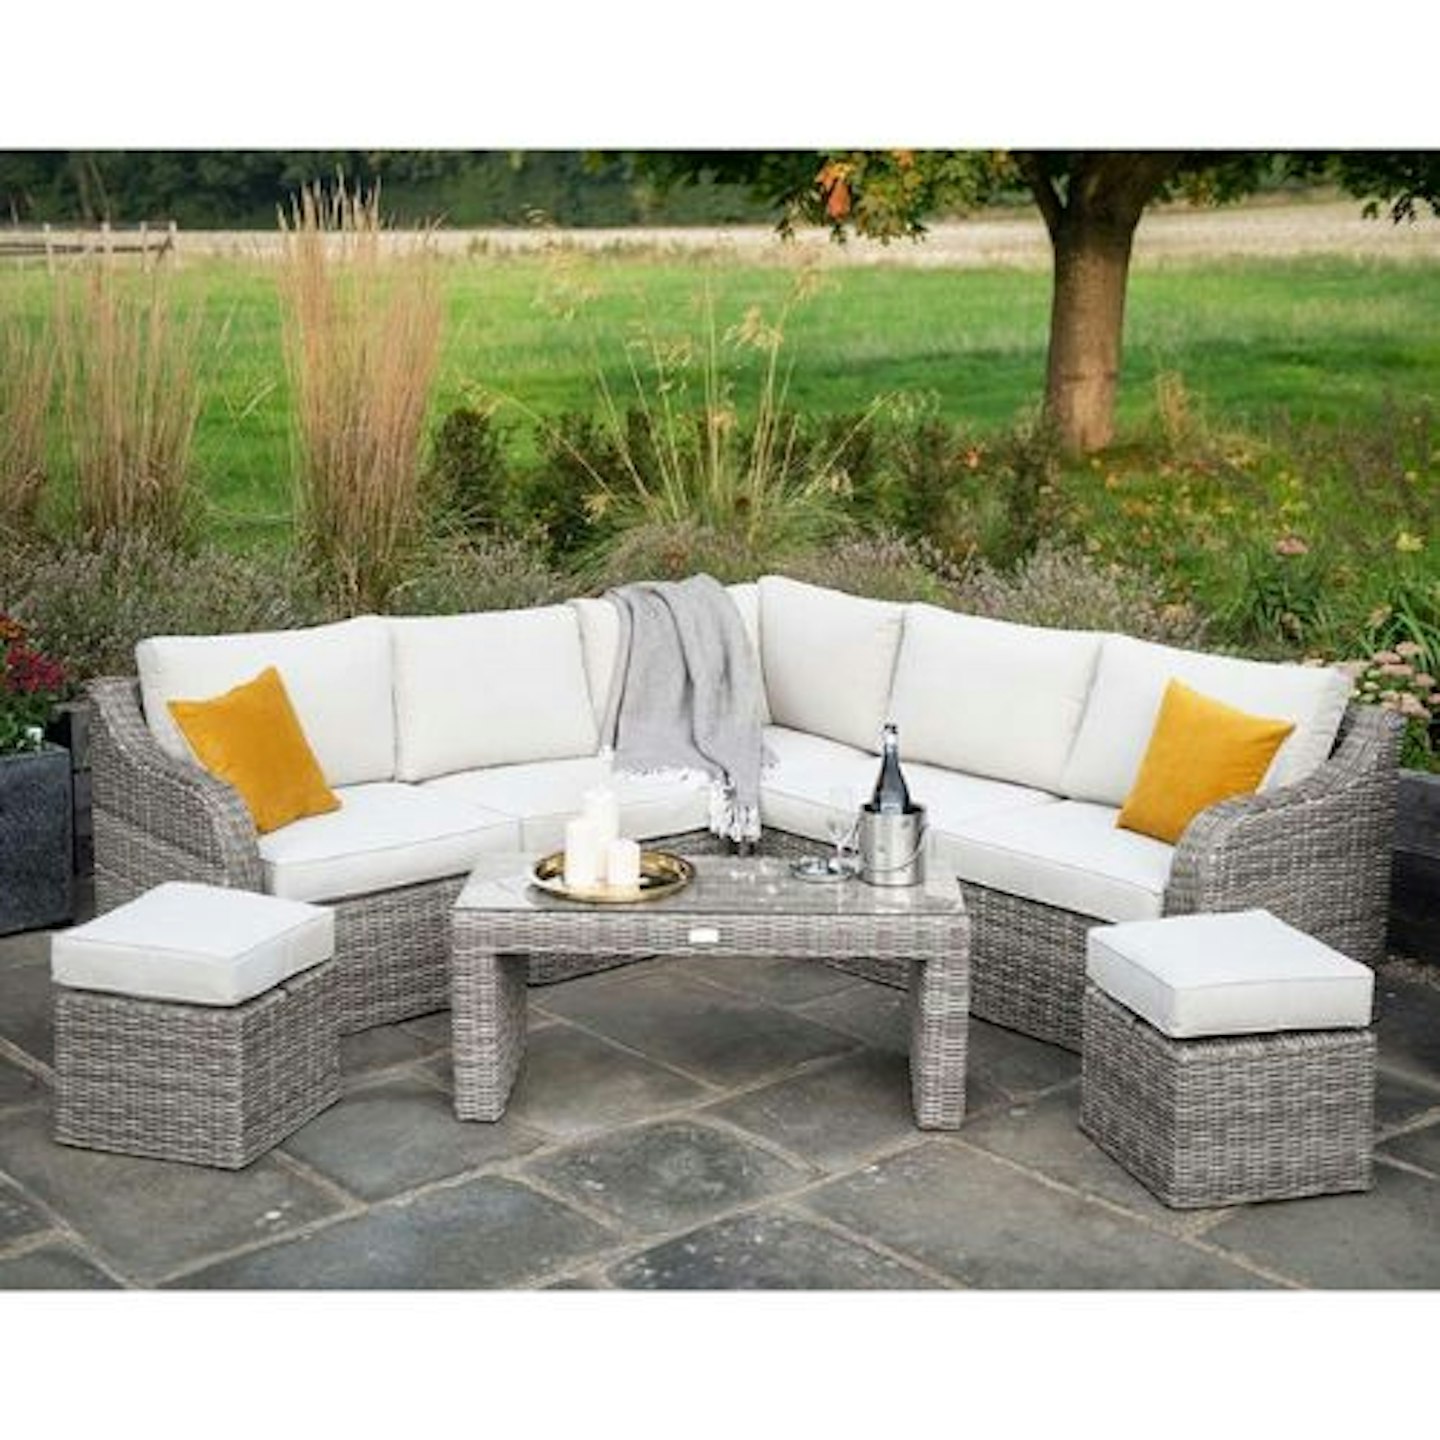 Luxury Rattan 7 Seater Sofa Set with Coffee Table in Stone